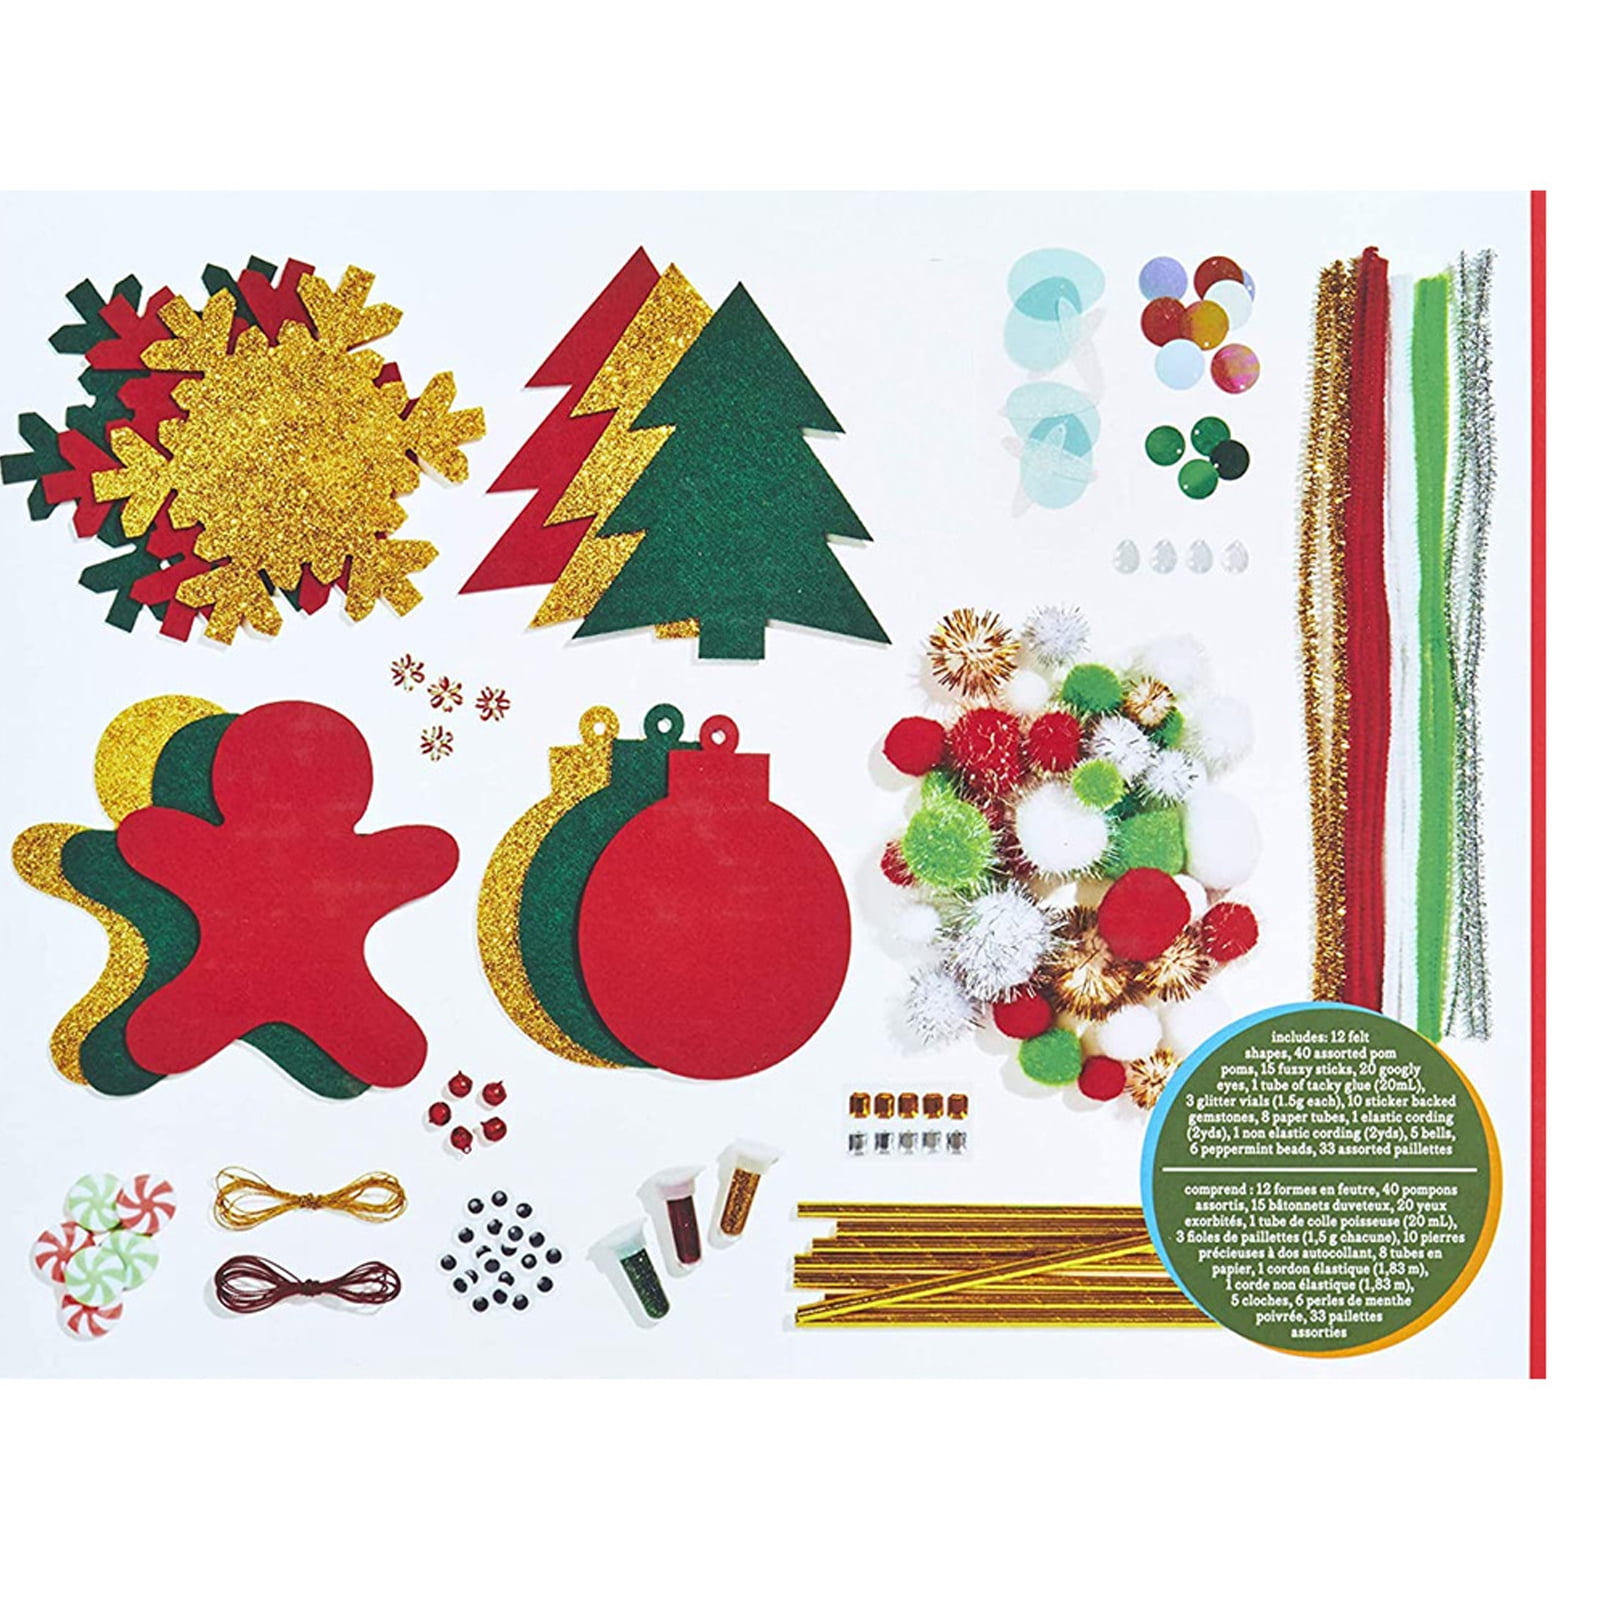 The Best Christmas Craft Kits for Adults in 2022